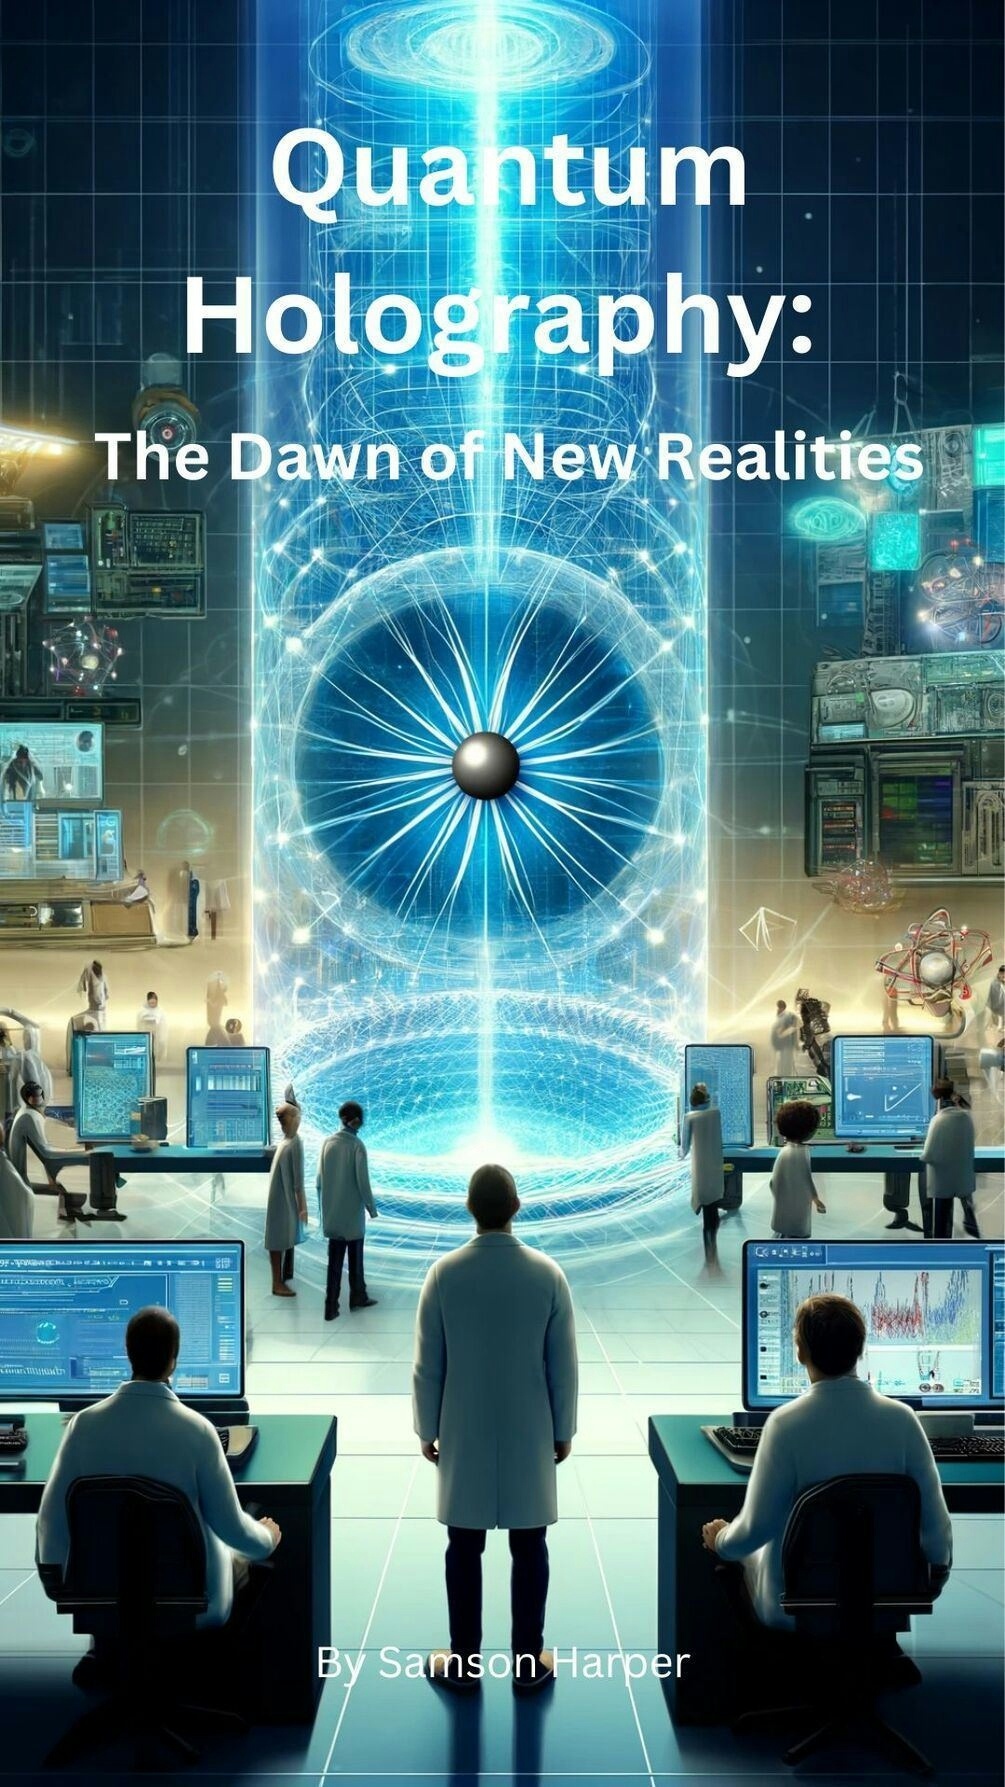 Quantum Holography: The Dawn of New Realities